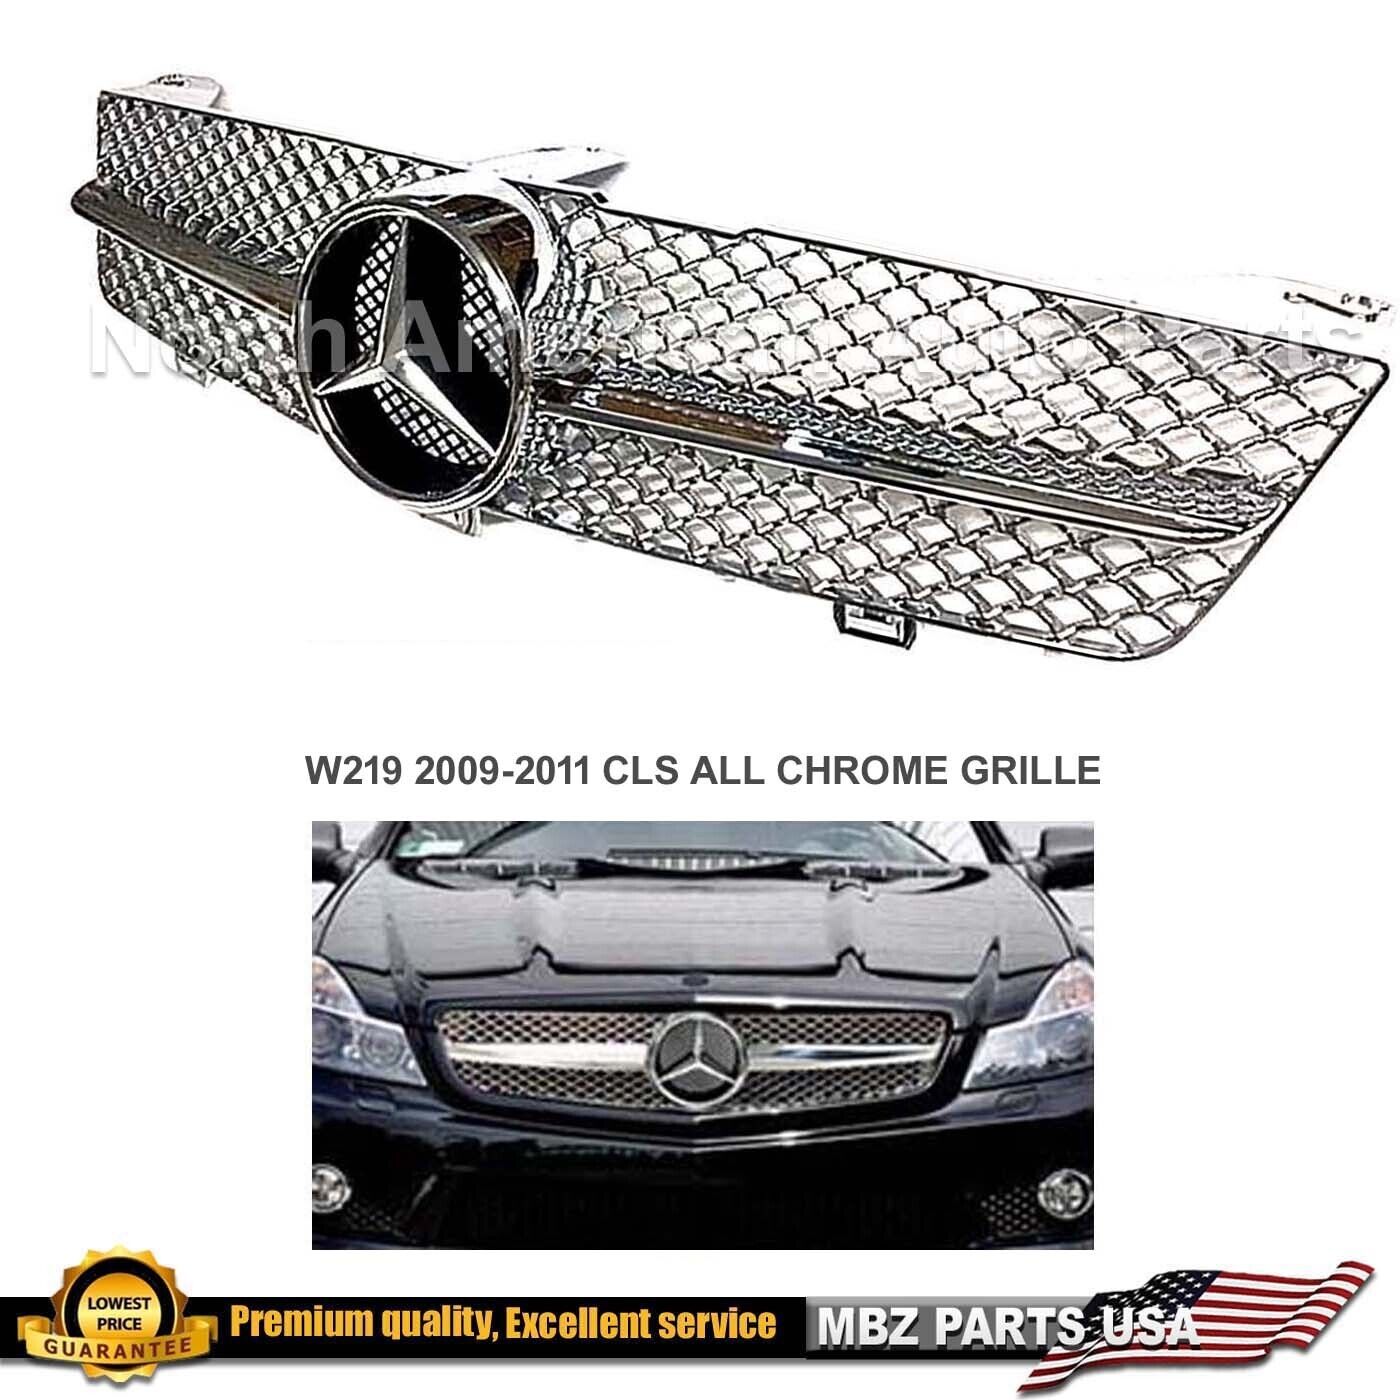 CLS550 Chrome Grille Facelift AMG Upgrade Bumper Star 2009 2010 2011 CLS63 New